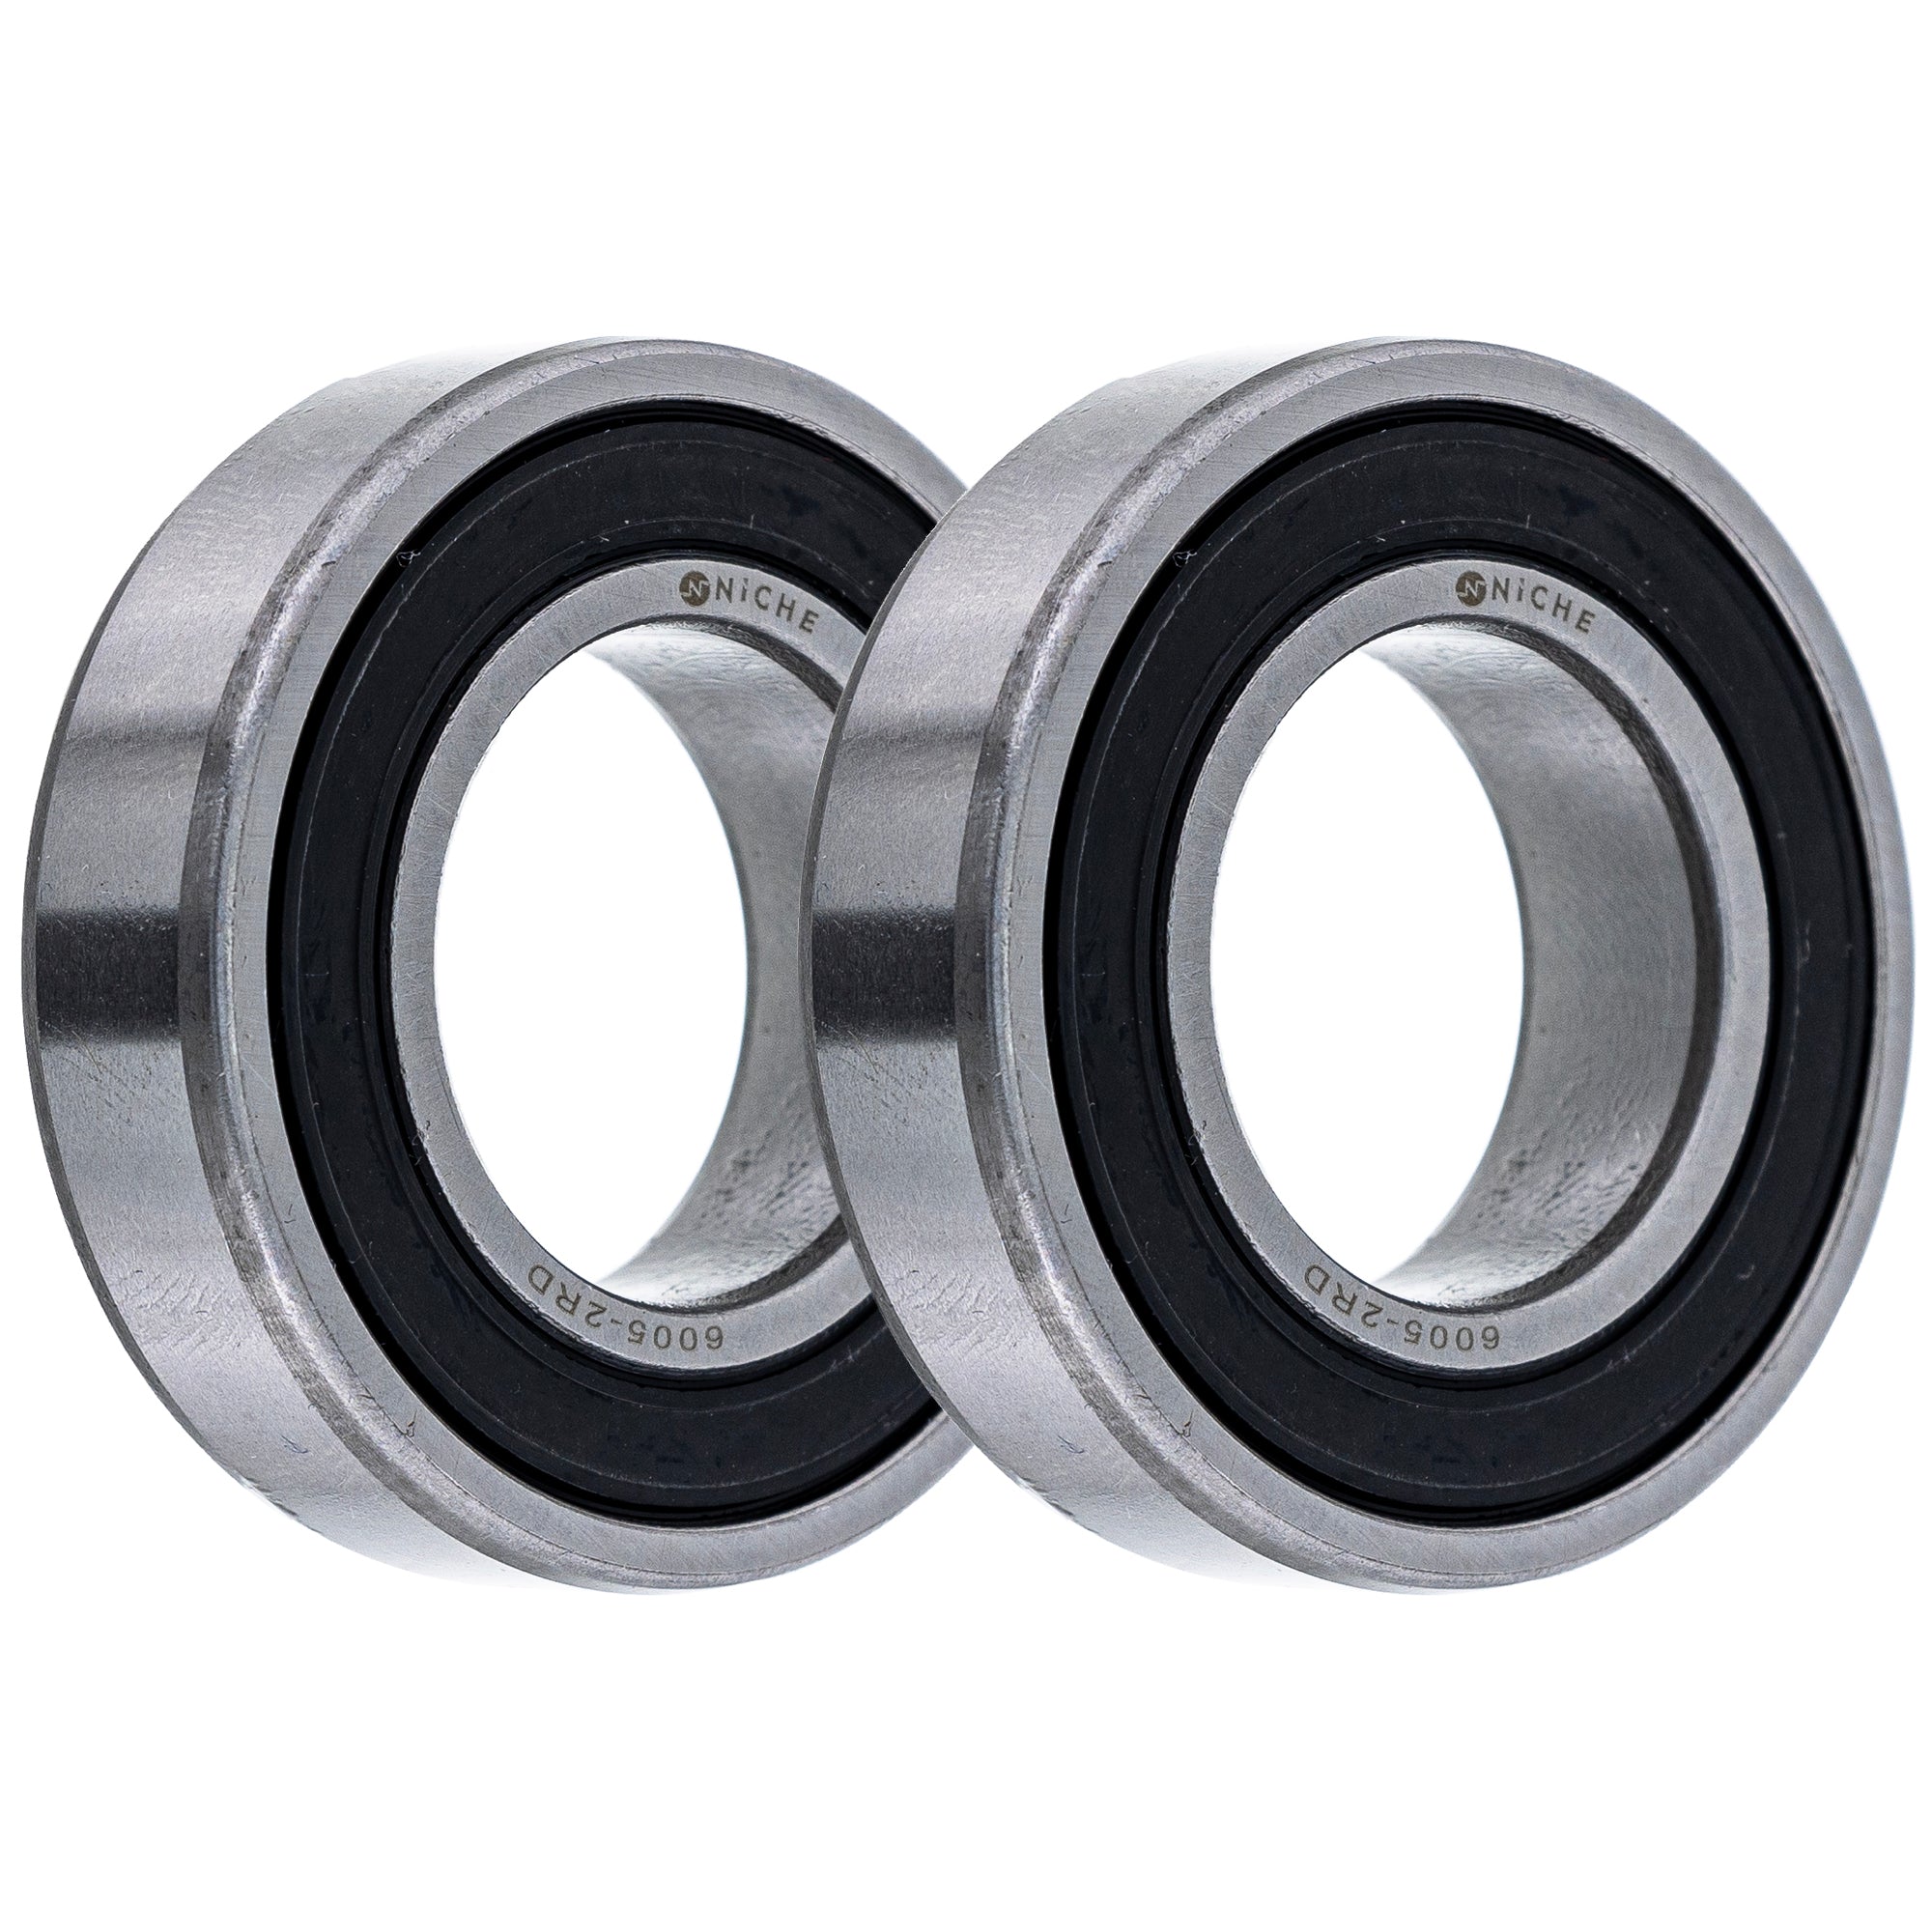 Electric Grade, Single Row, Deep Groove, Ball Bearing Pack of 2 2-Pack for zOTHER RVT1000R NICHE 519-CBB2339R